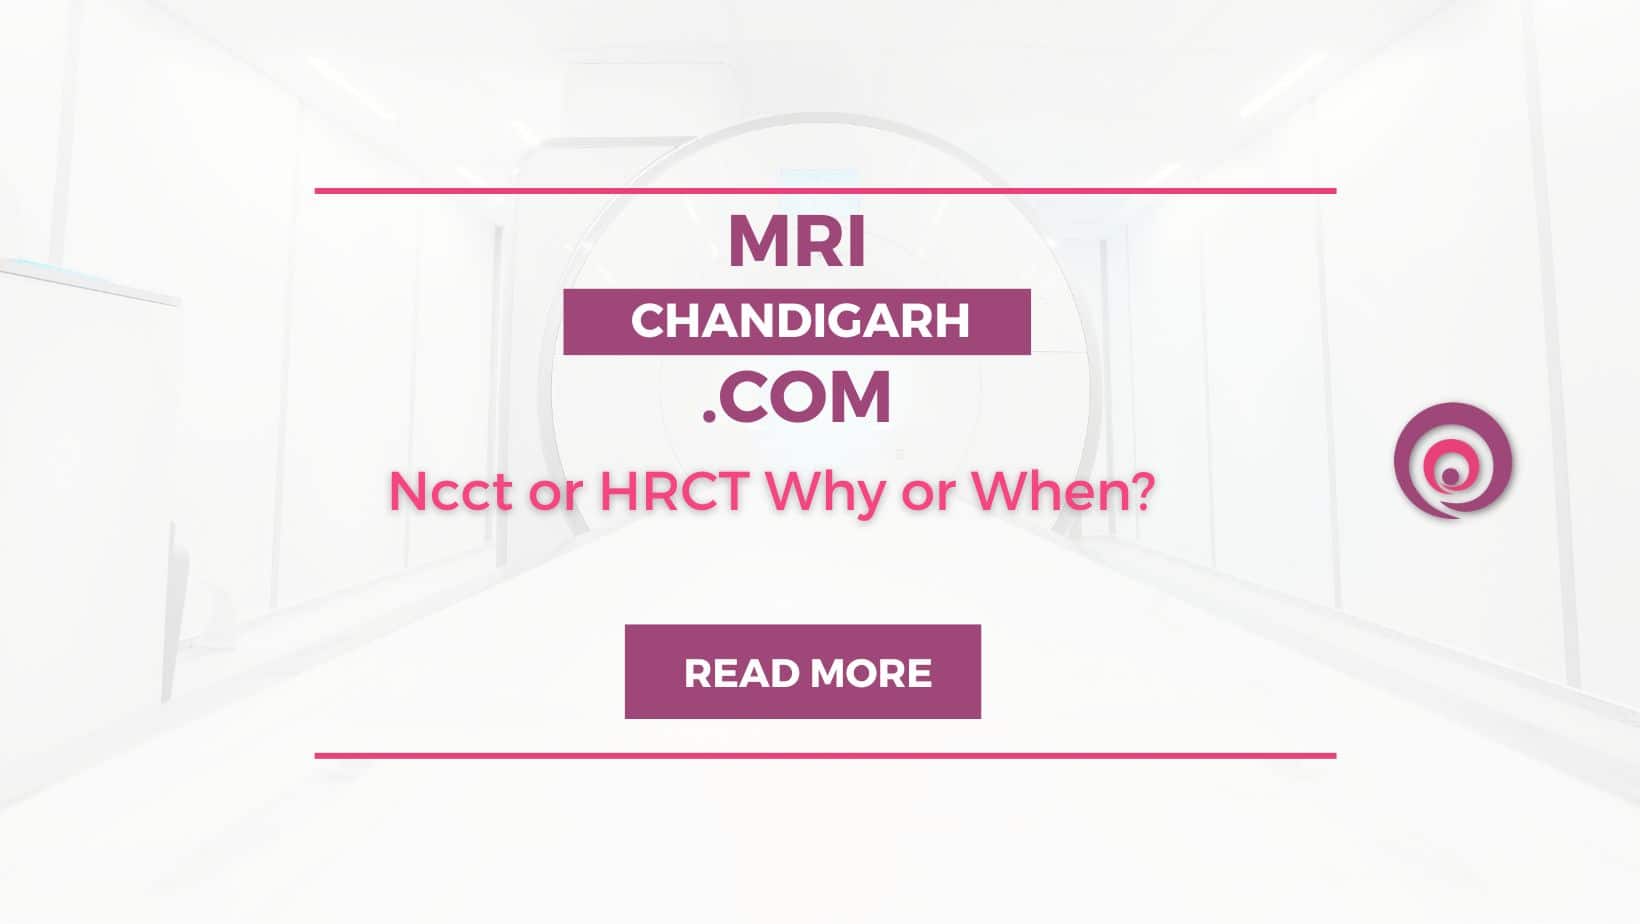 Ncct or HRCT Why or When?